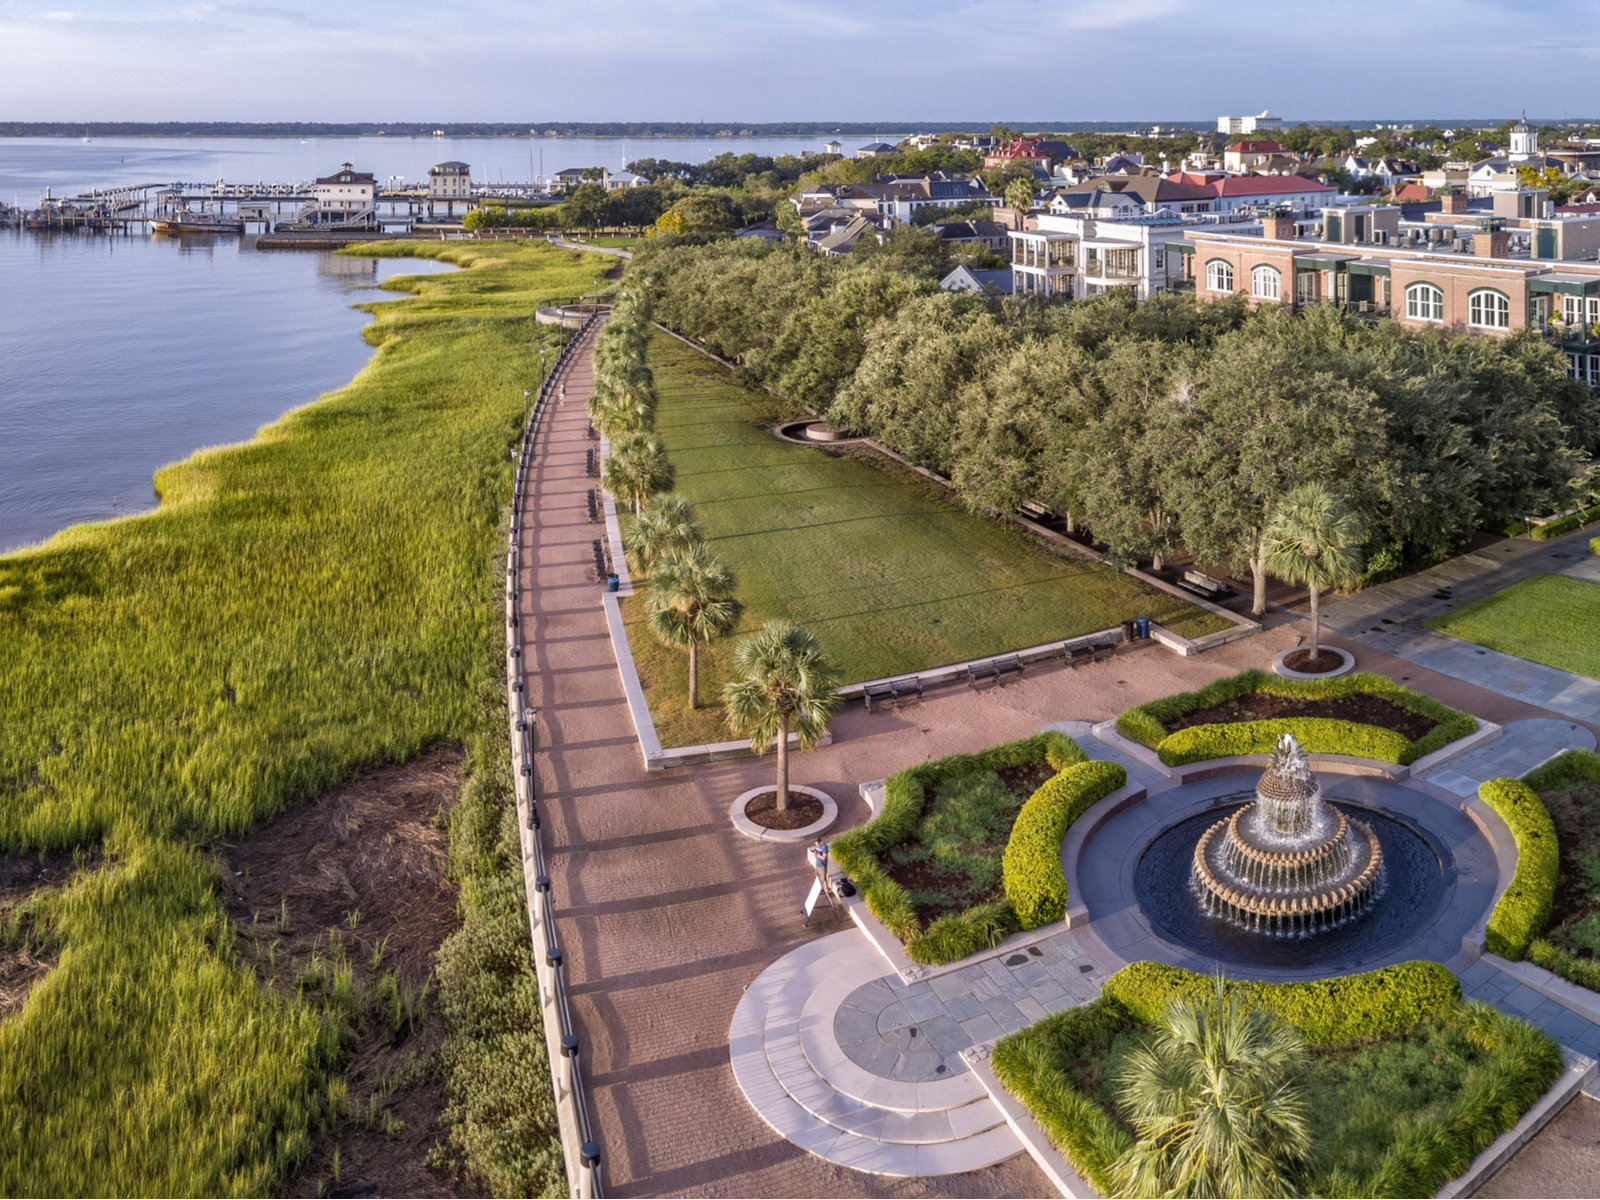 Waterfront park in Charleston South Carolina, one of the best things to do